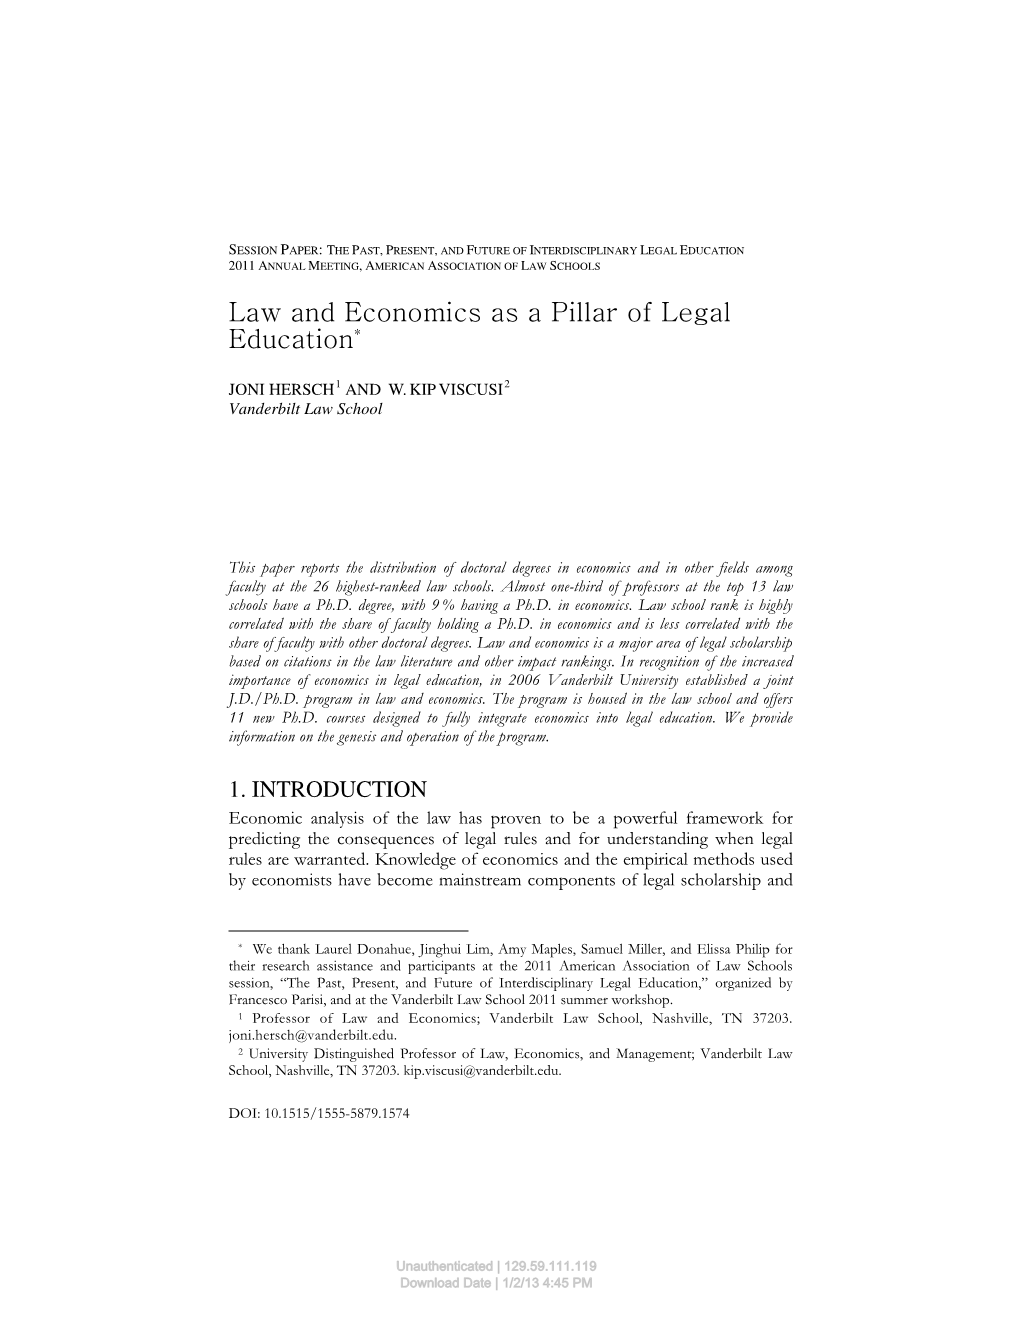 Law and Economics As a Pillar of Legal Education*